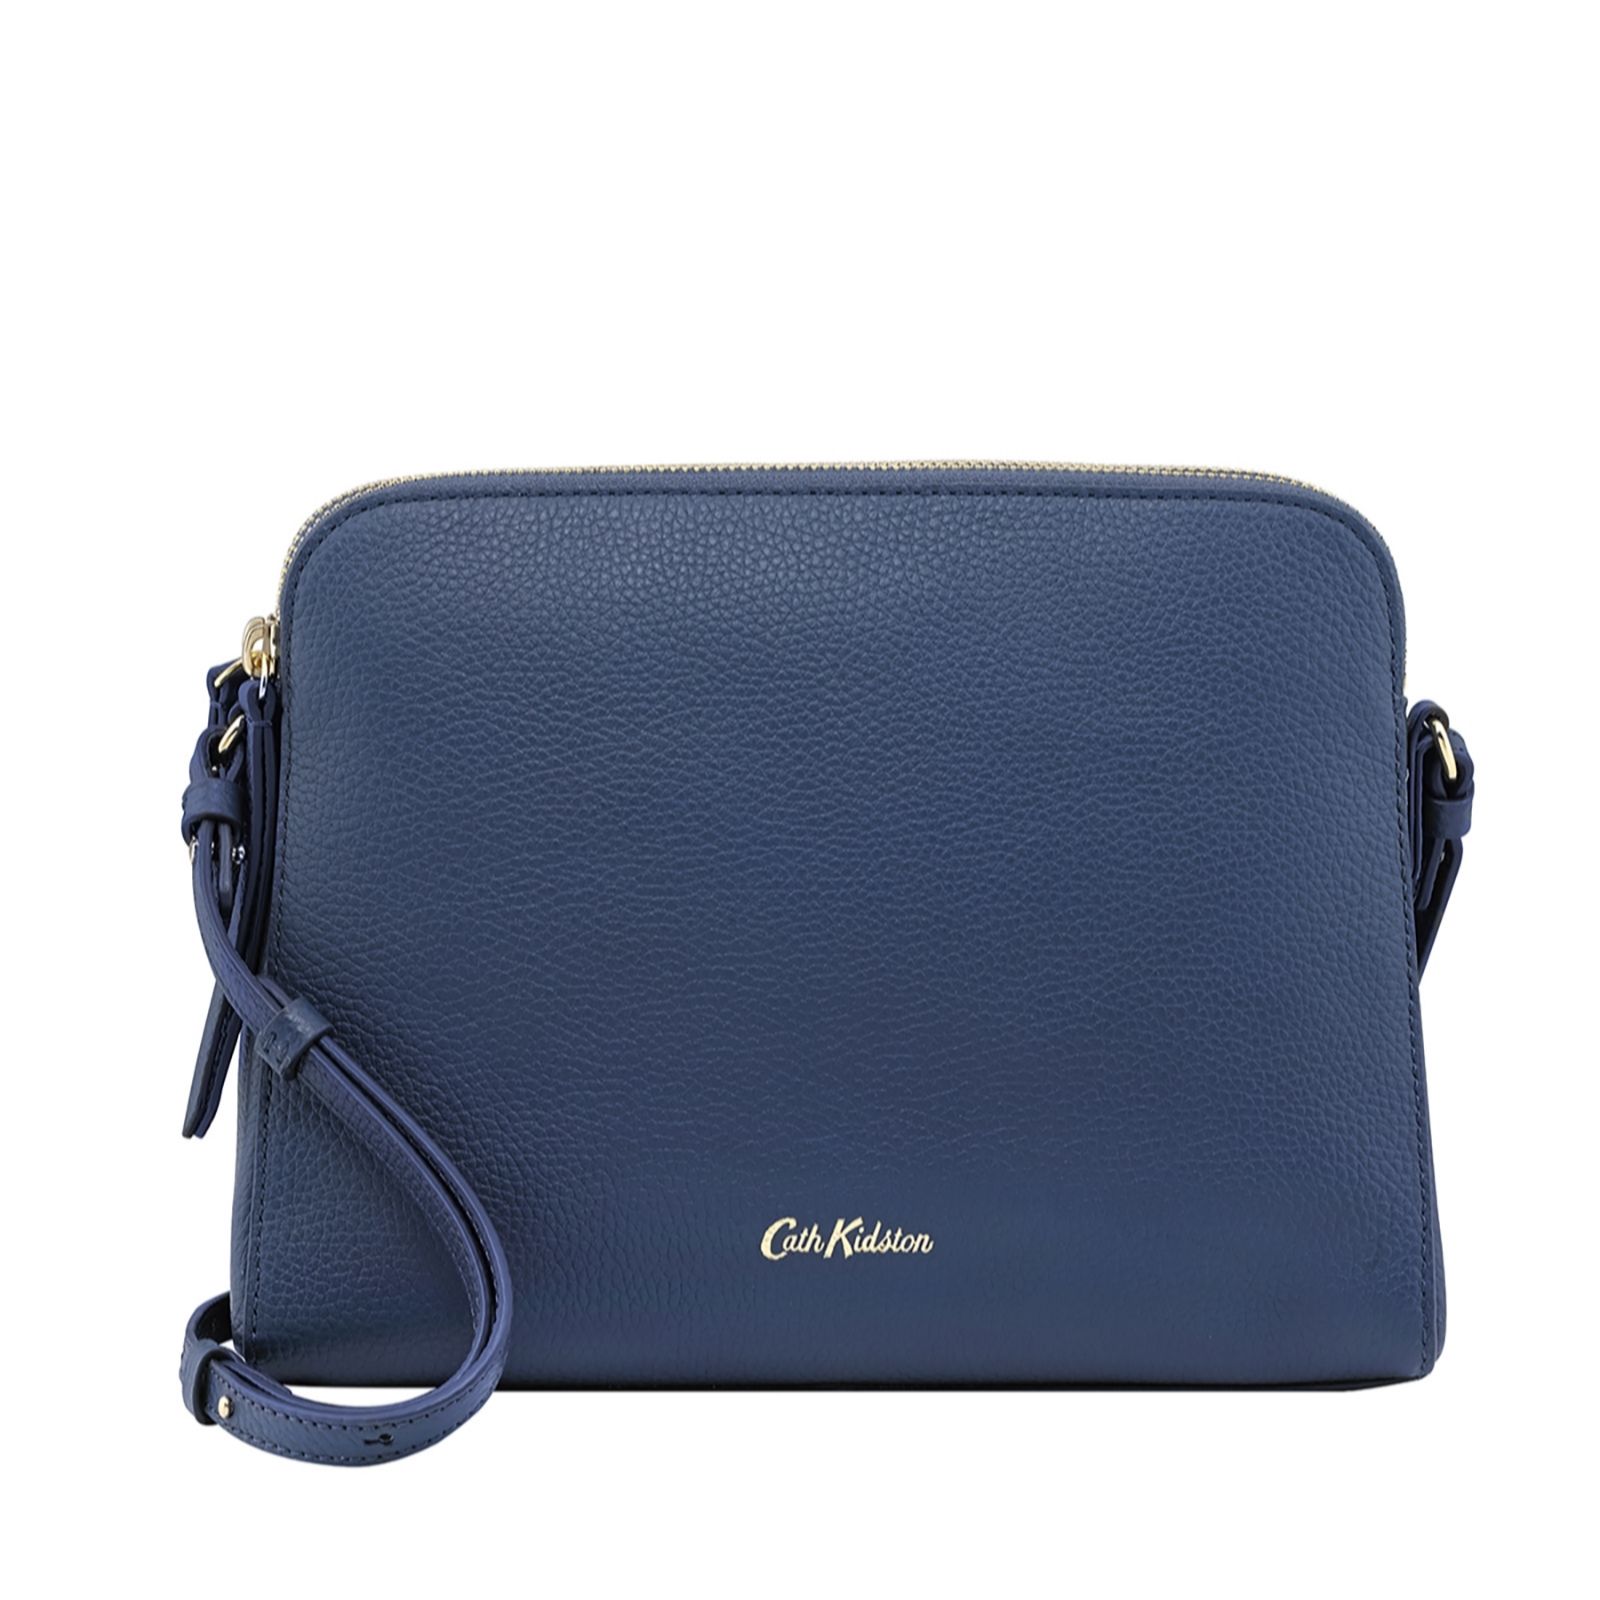 cath kidston maltby leather bag